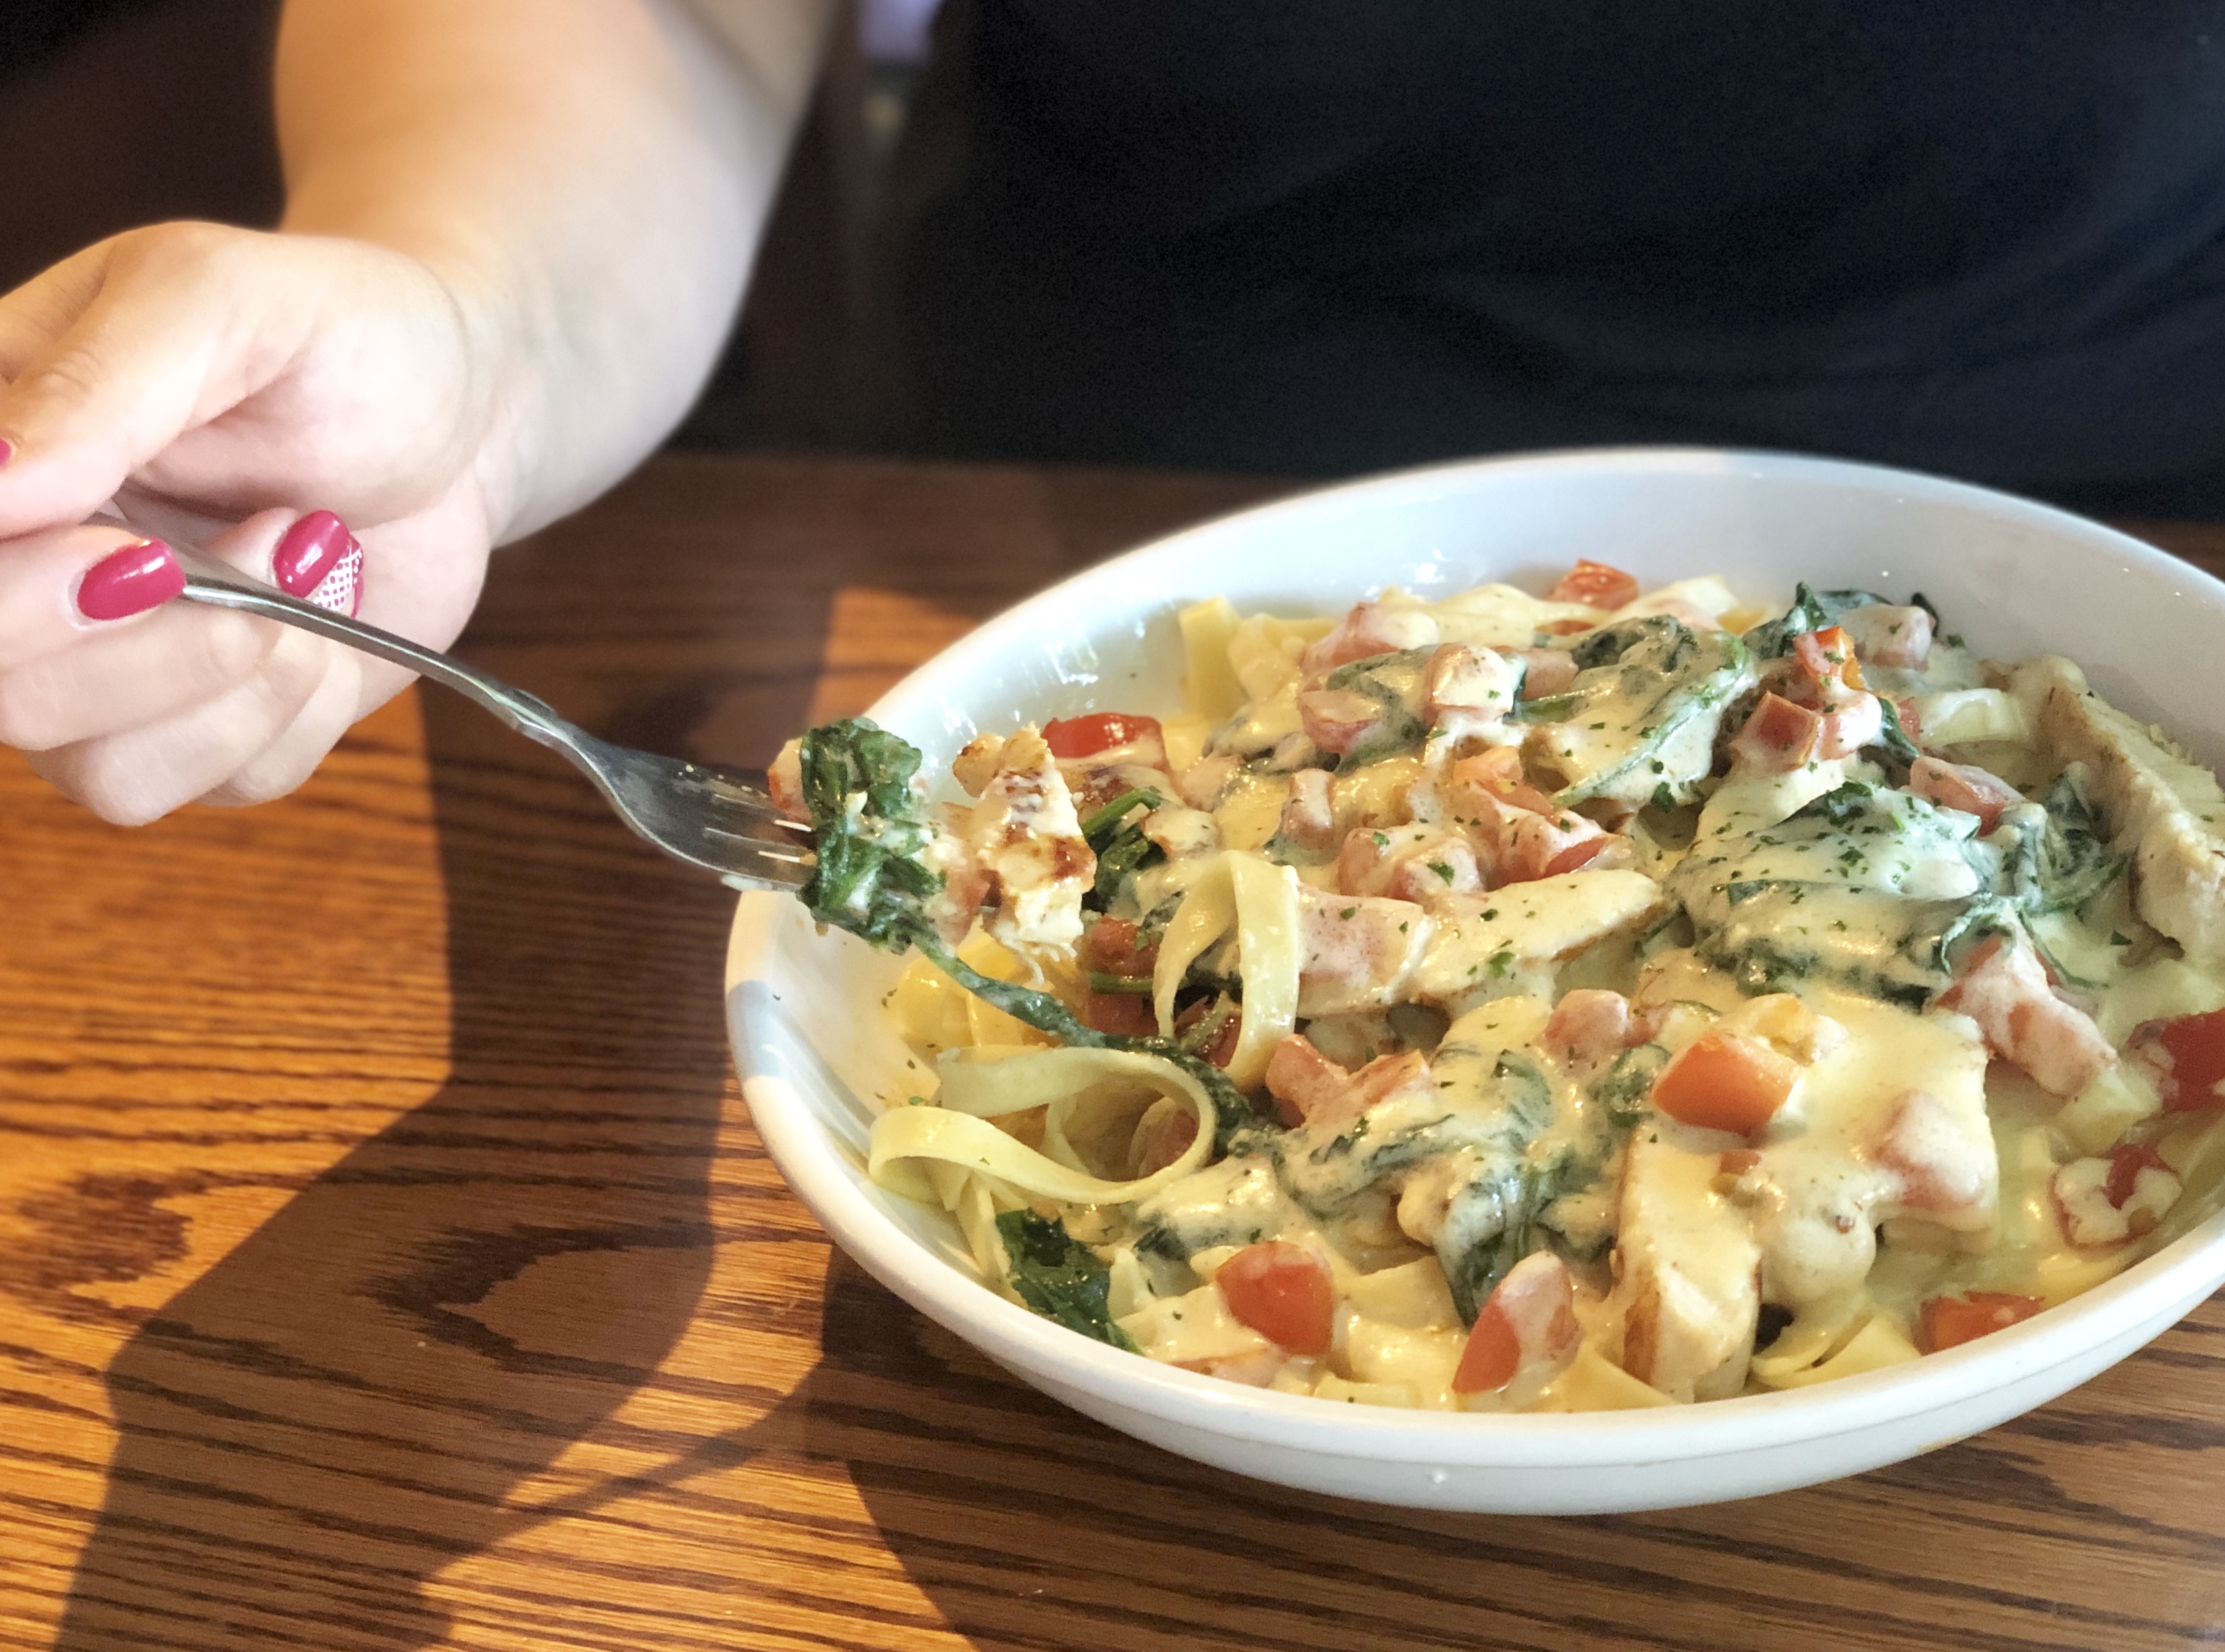 Top 3 Olive Garden Deals You Can Get Today The Krazy Coupon Lady